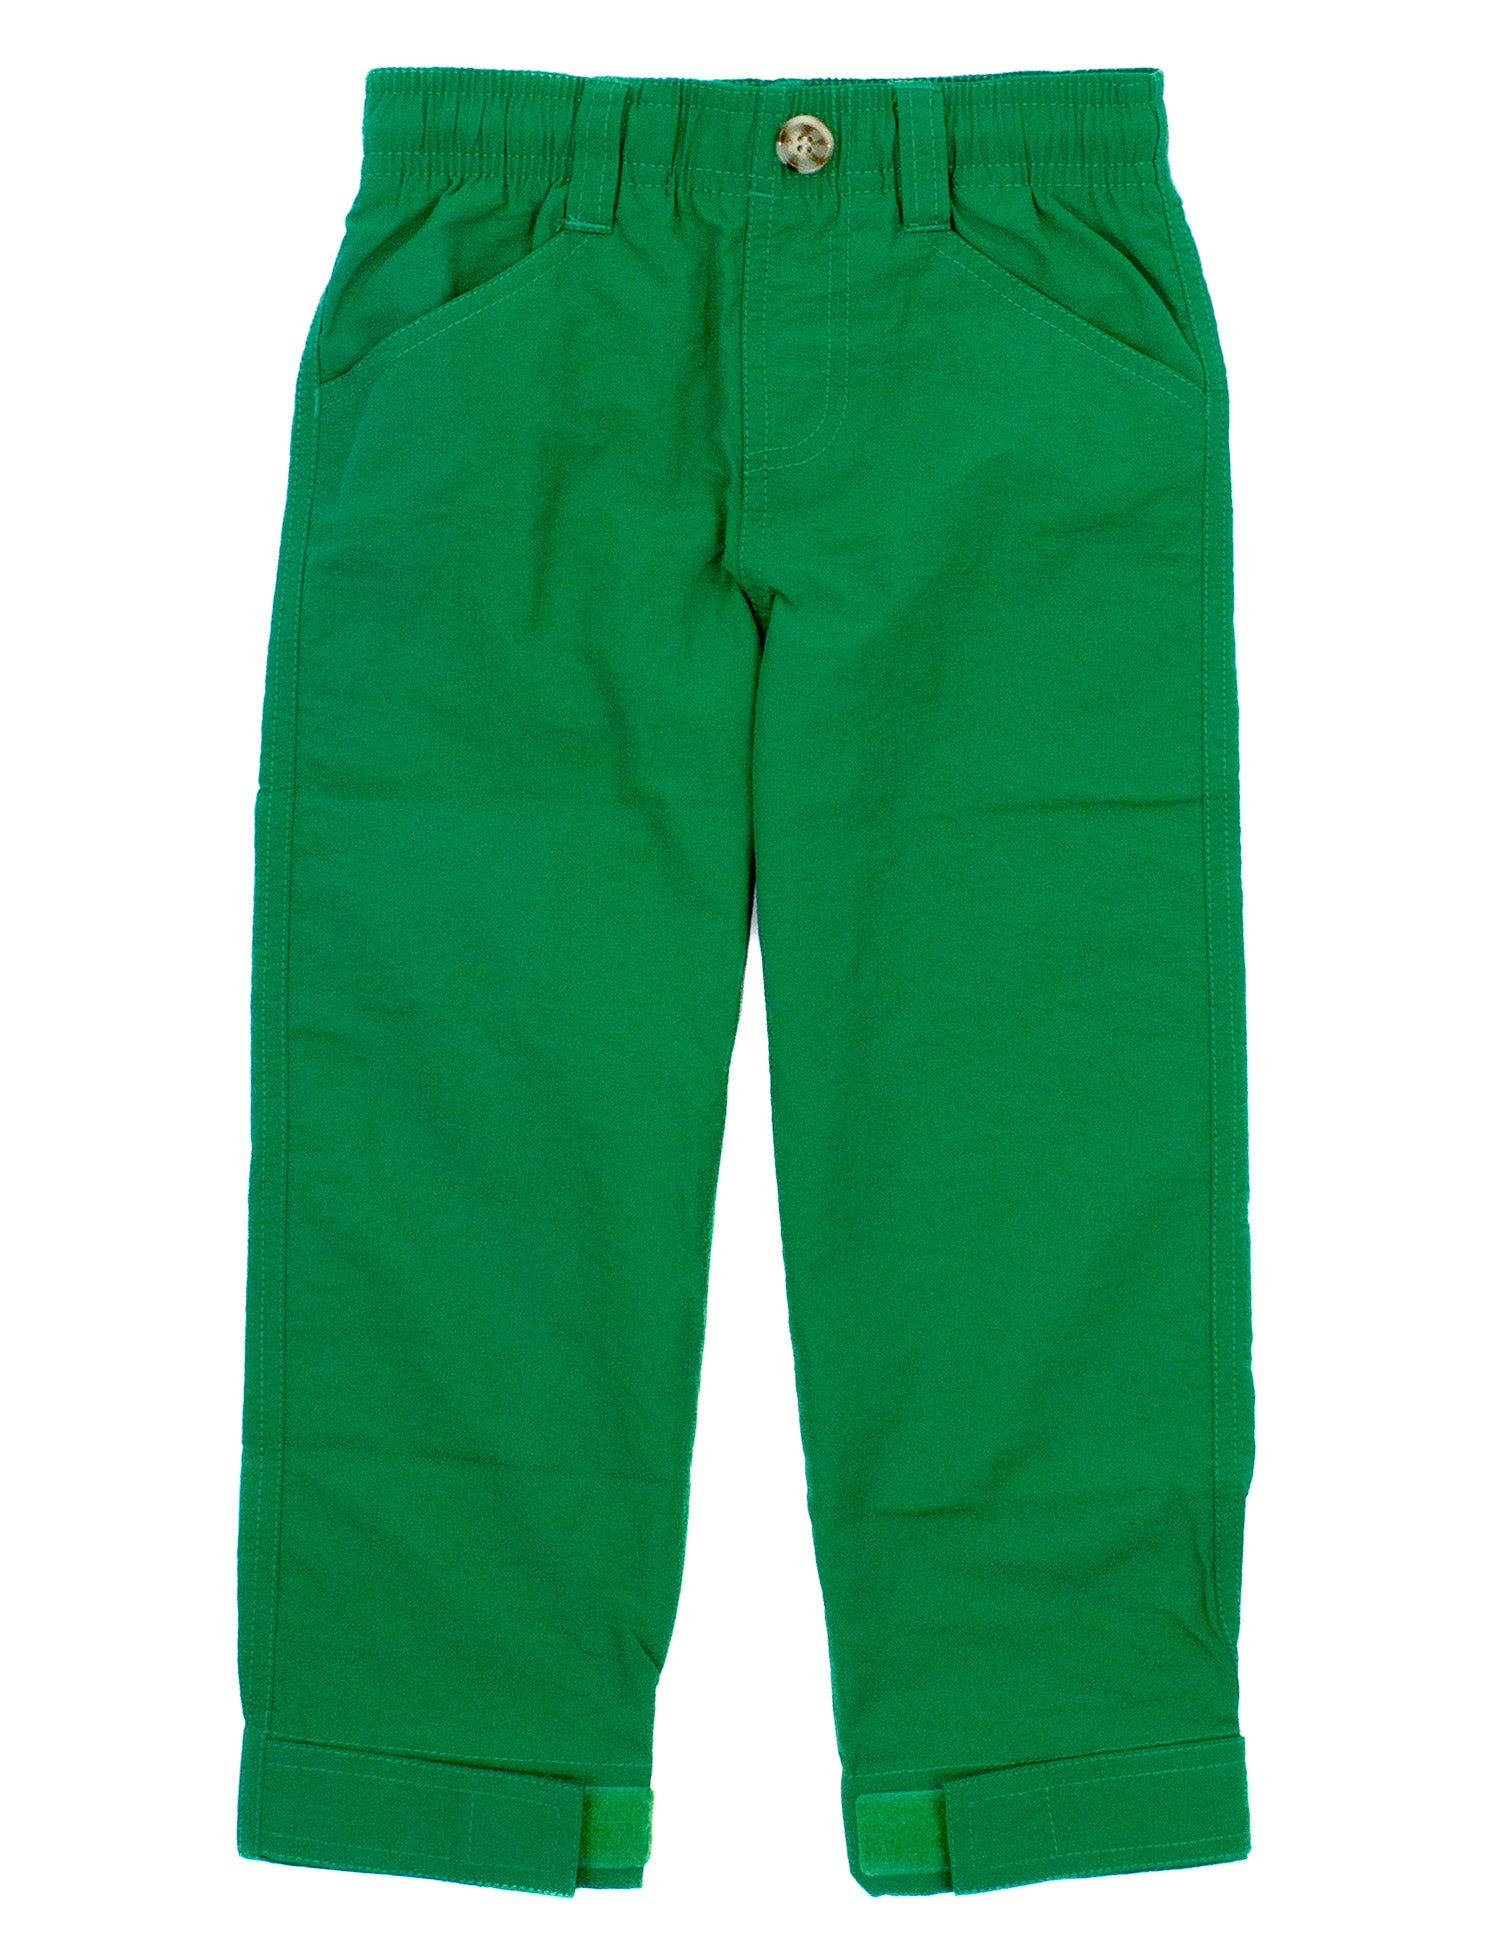 A baby boy's comfortable green chino pants, stylish and Properly Tied Properly Tide Green Pants.